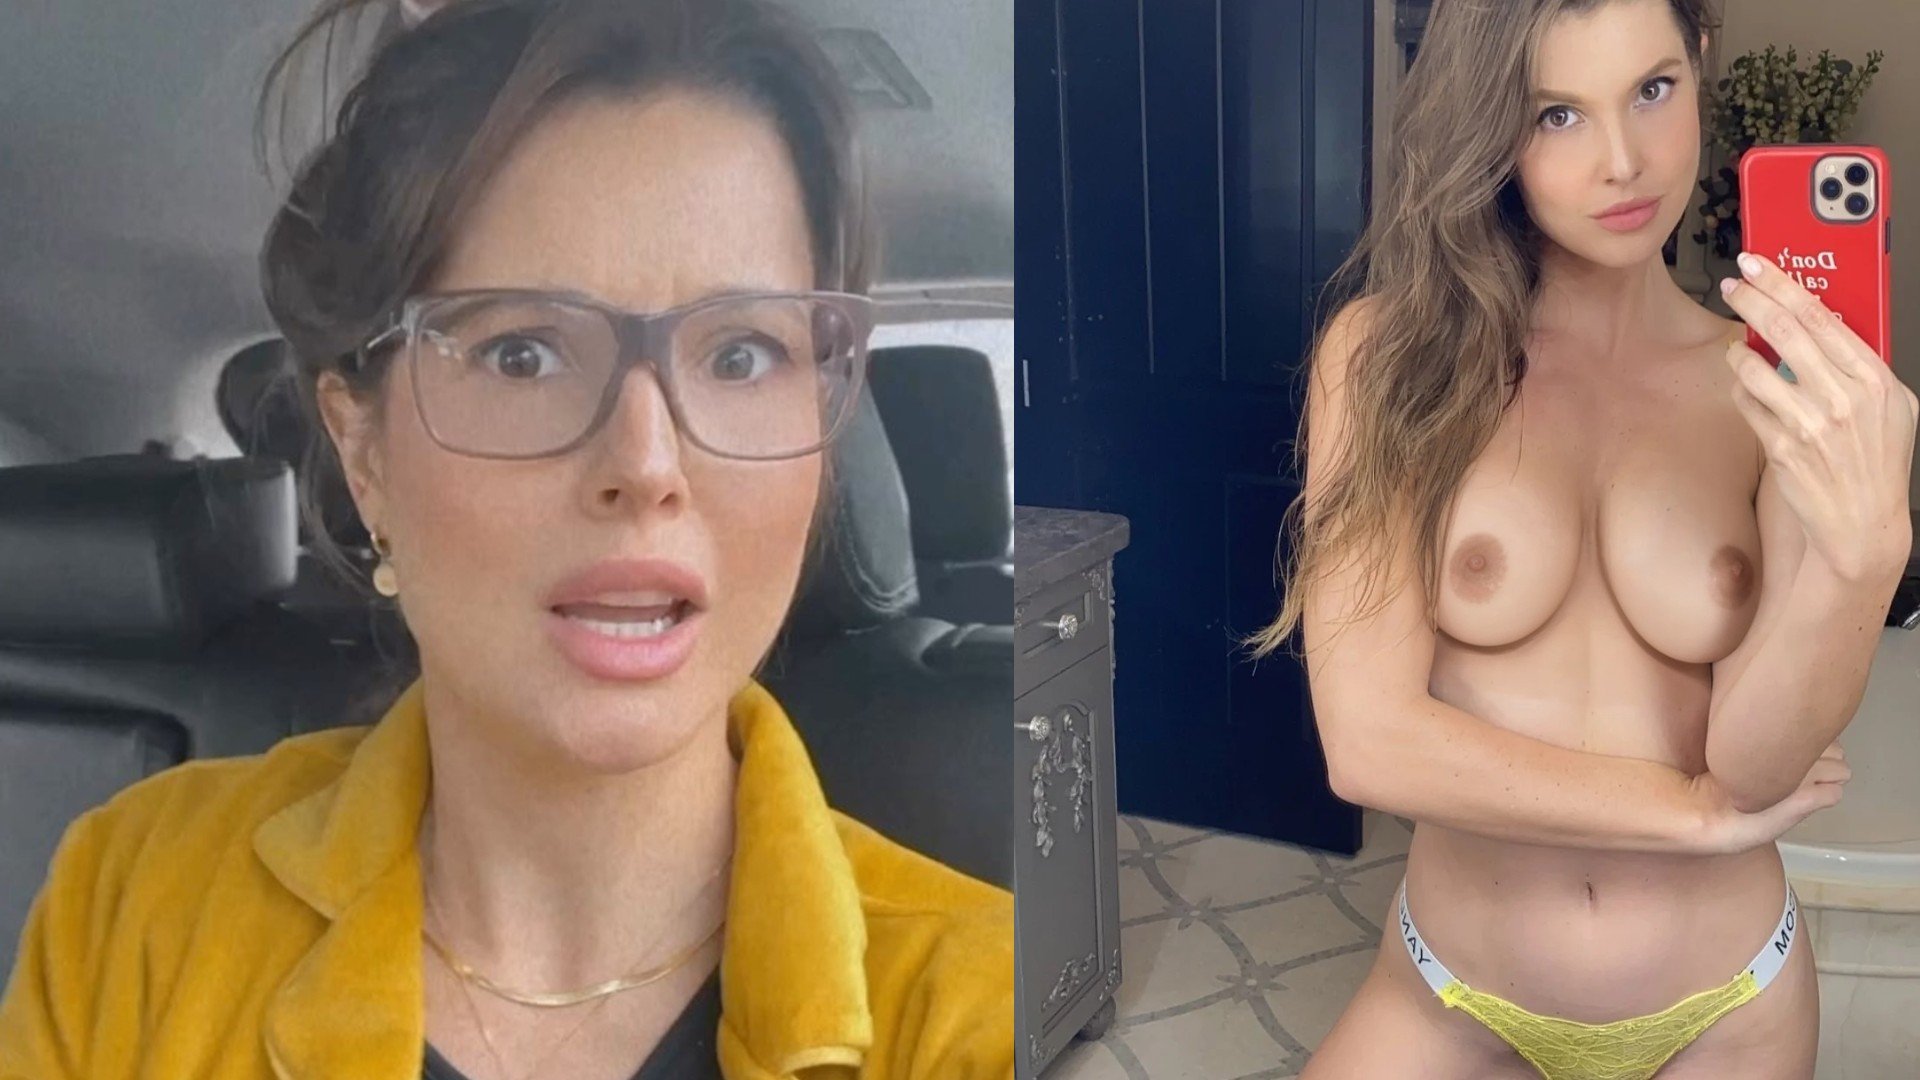 dora nguyen recommends amanda cerny nude ass pic